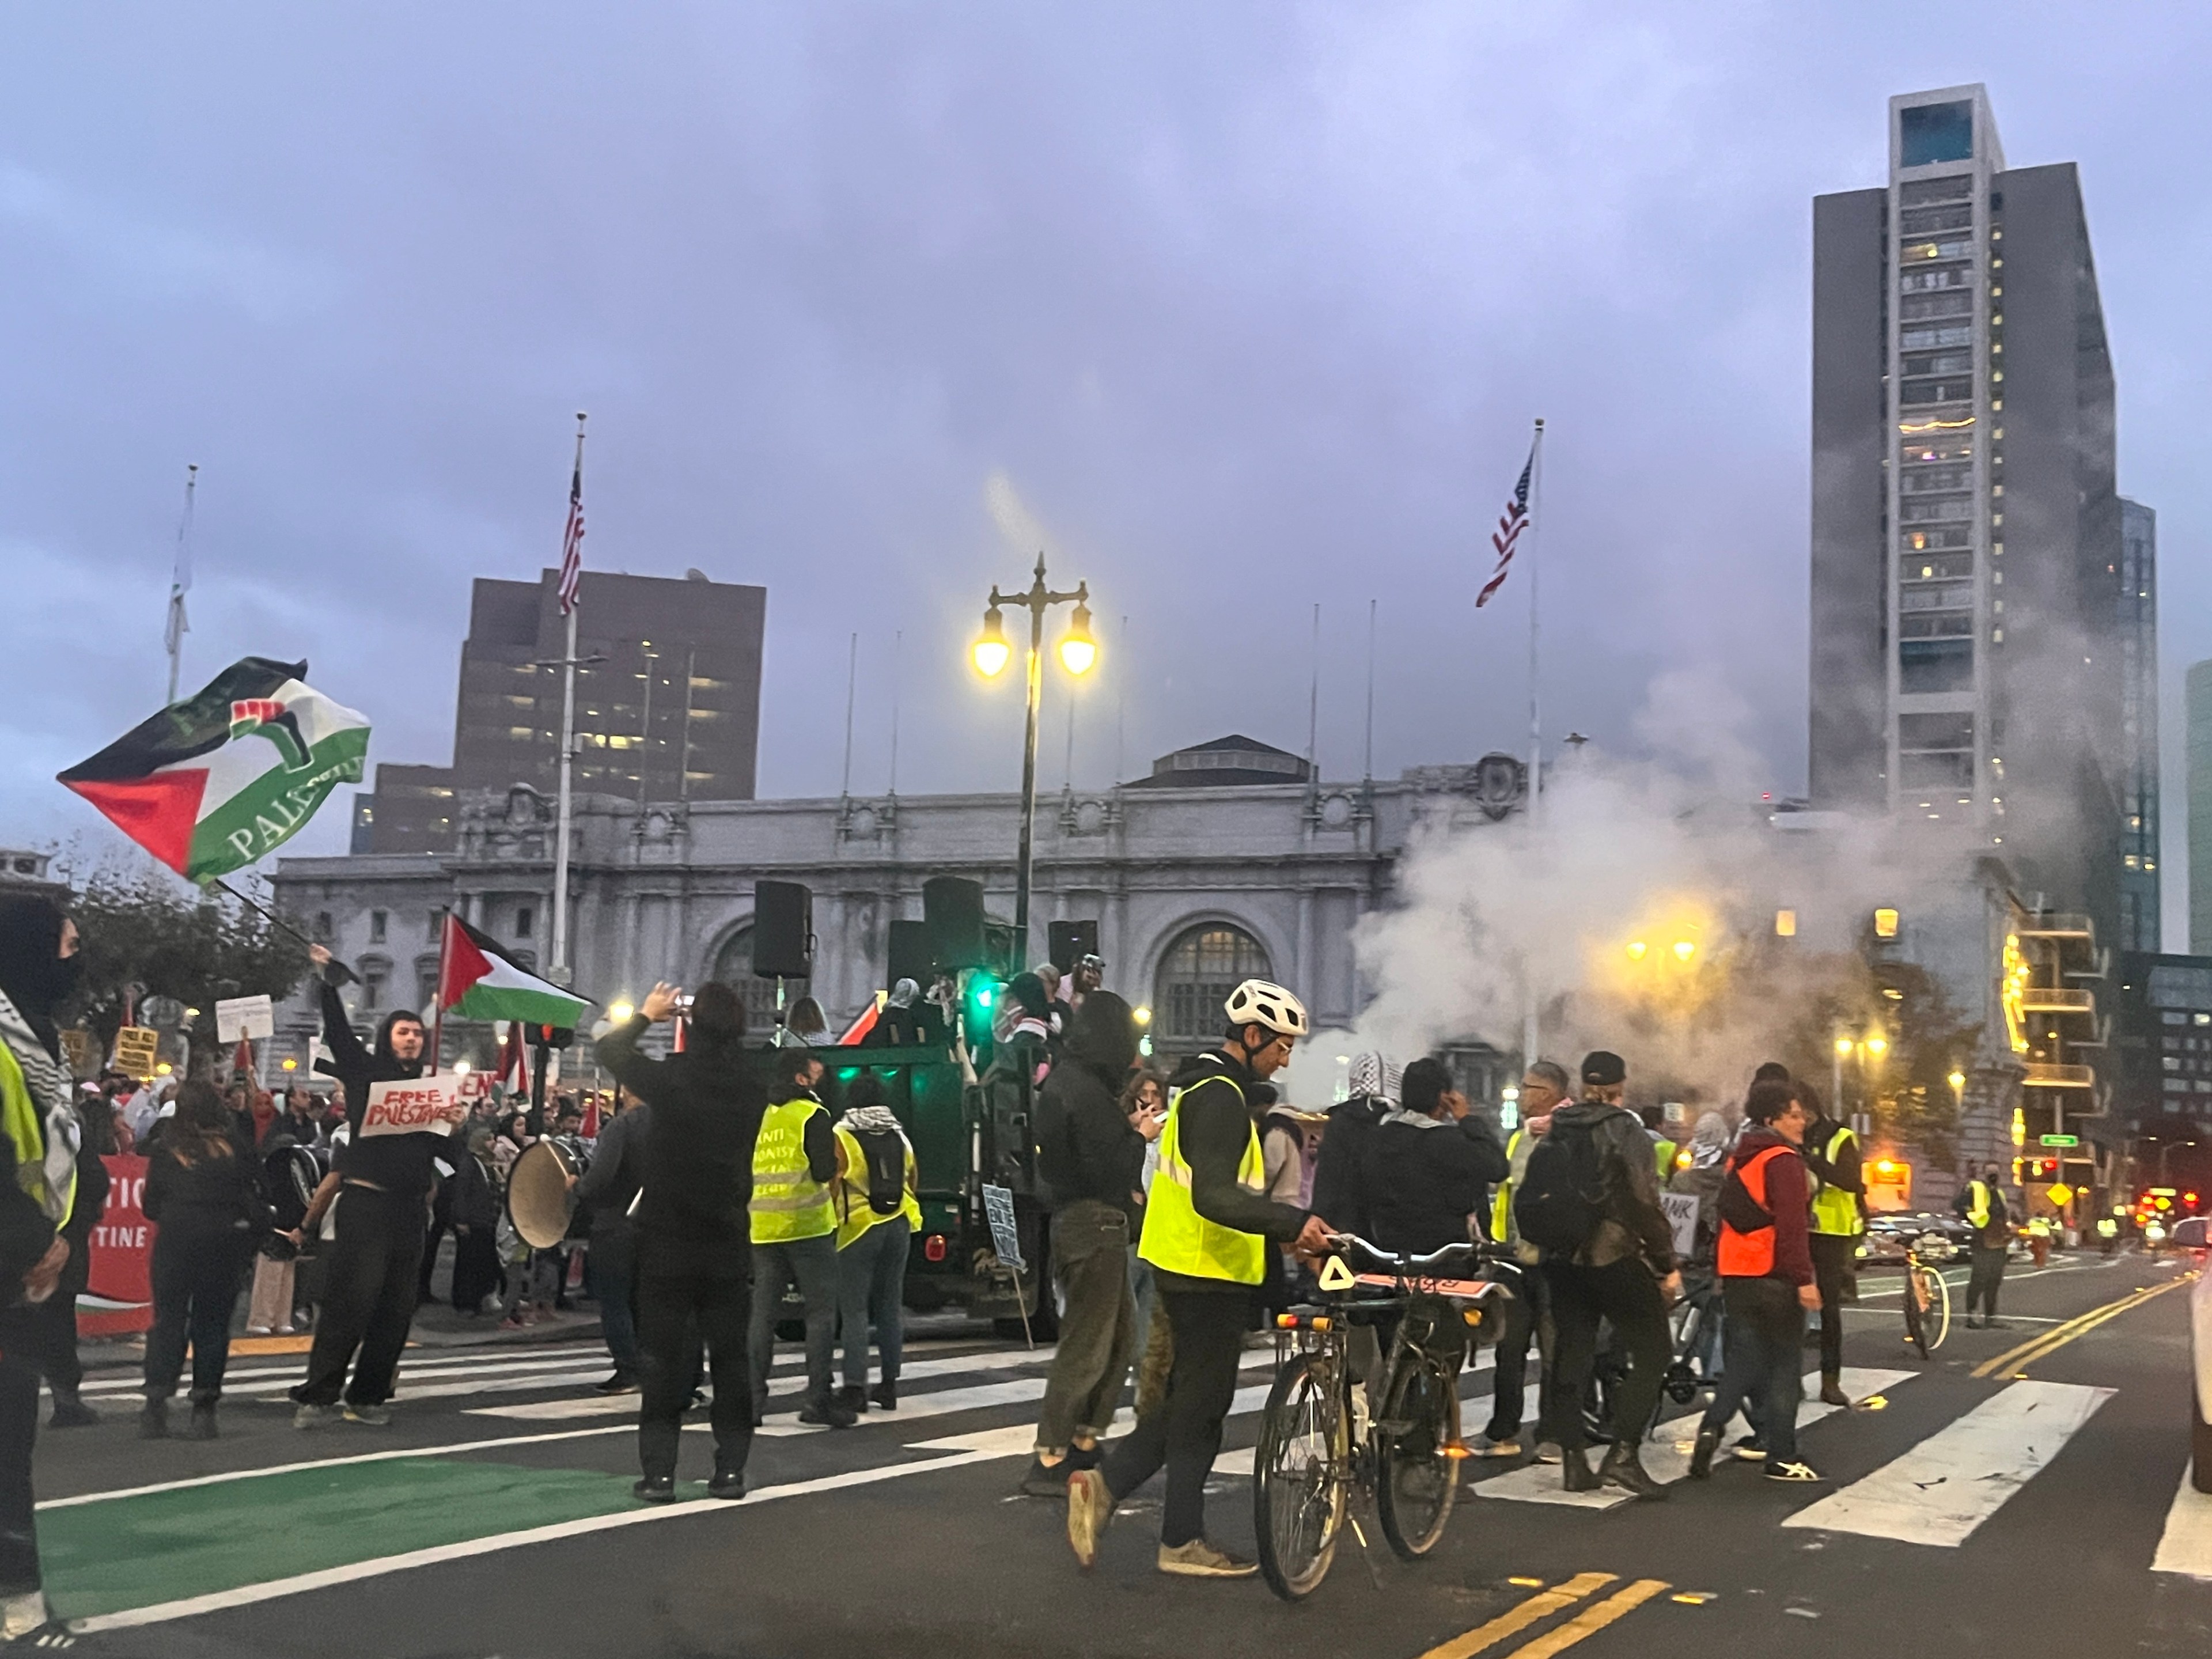 Protesters wave Palestinian flags under a foggy sky outside San Francisco City Hall.